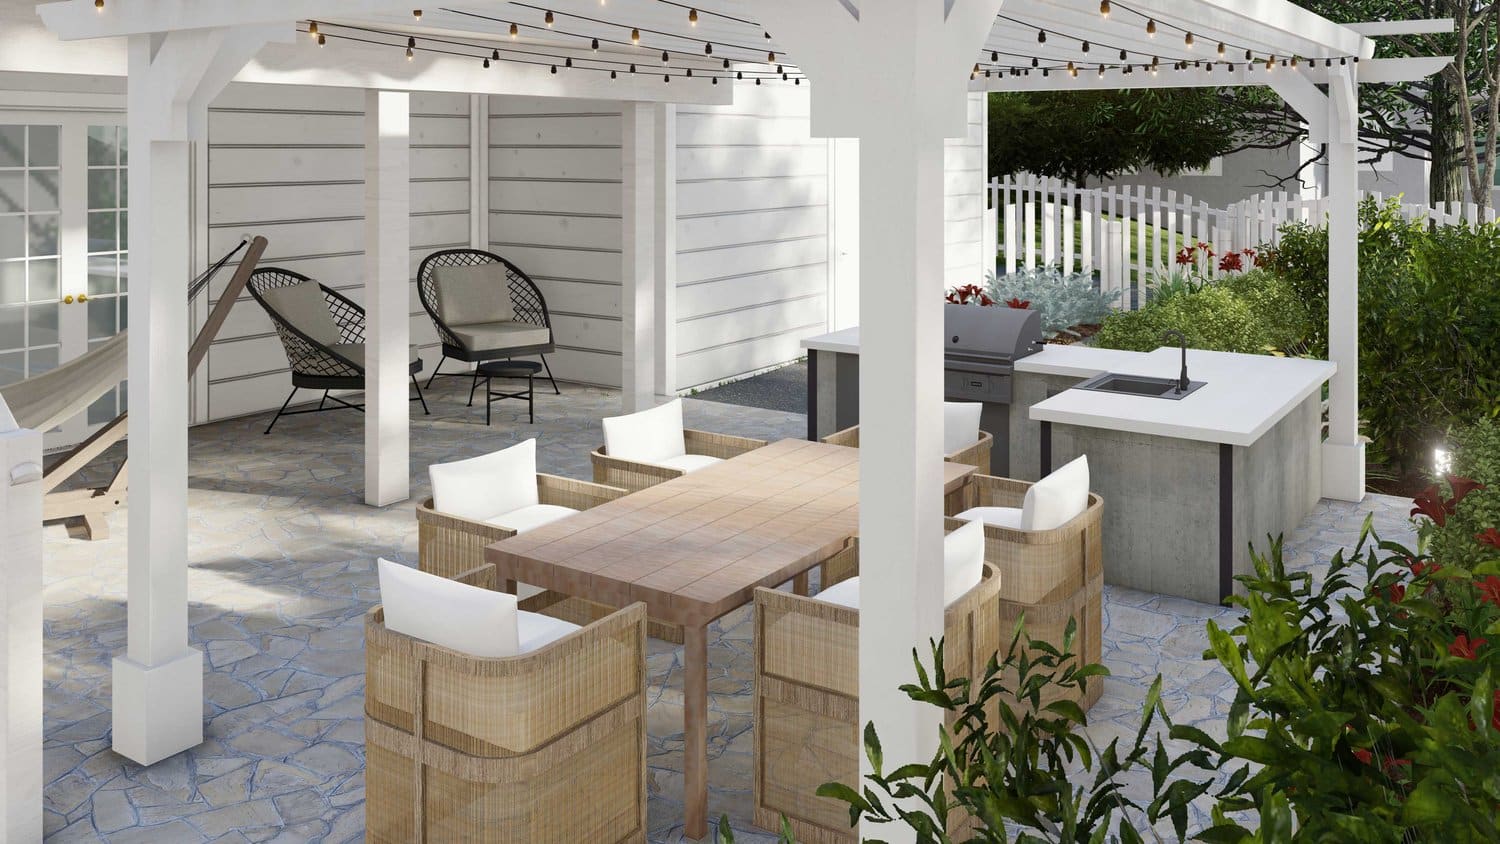 Arlington backyard with pergola over outdoor kitchen and dining area, with low armchair set